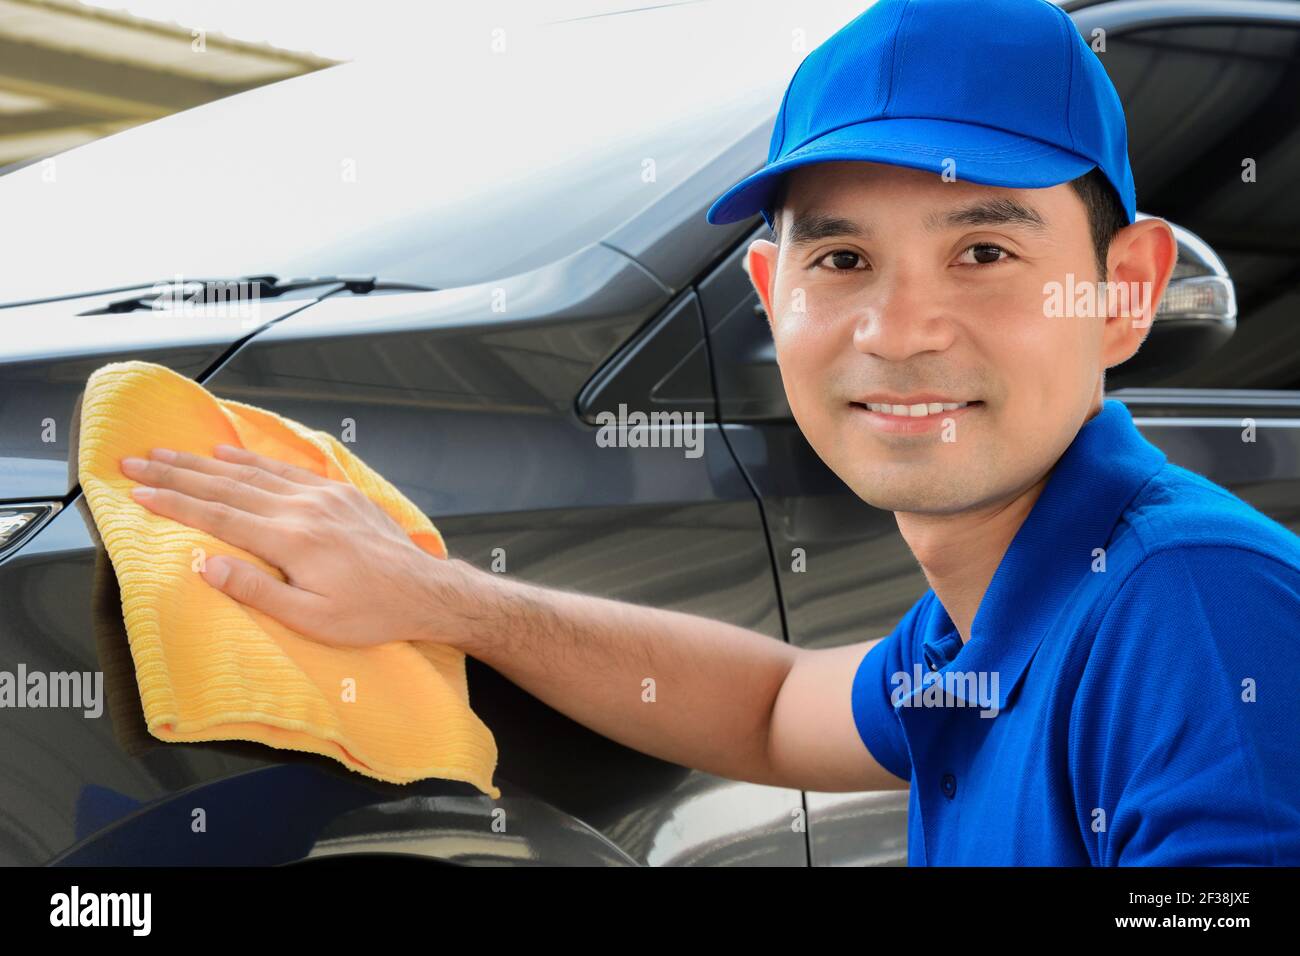 A man with smiling face cleaning car Stock Photo